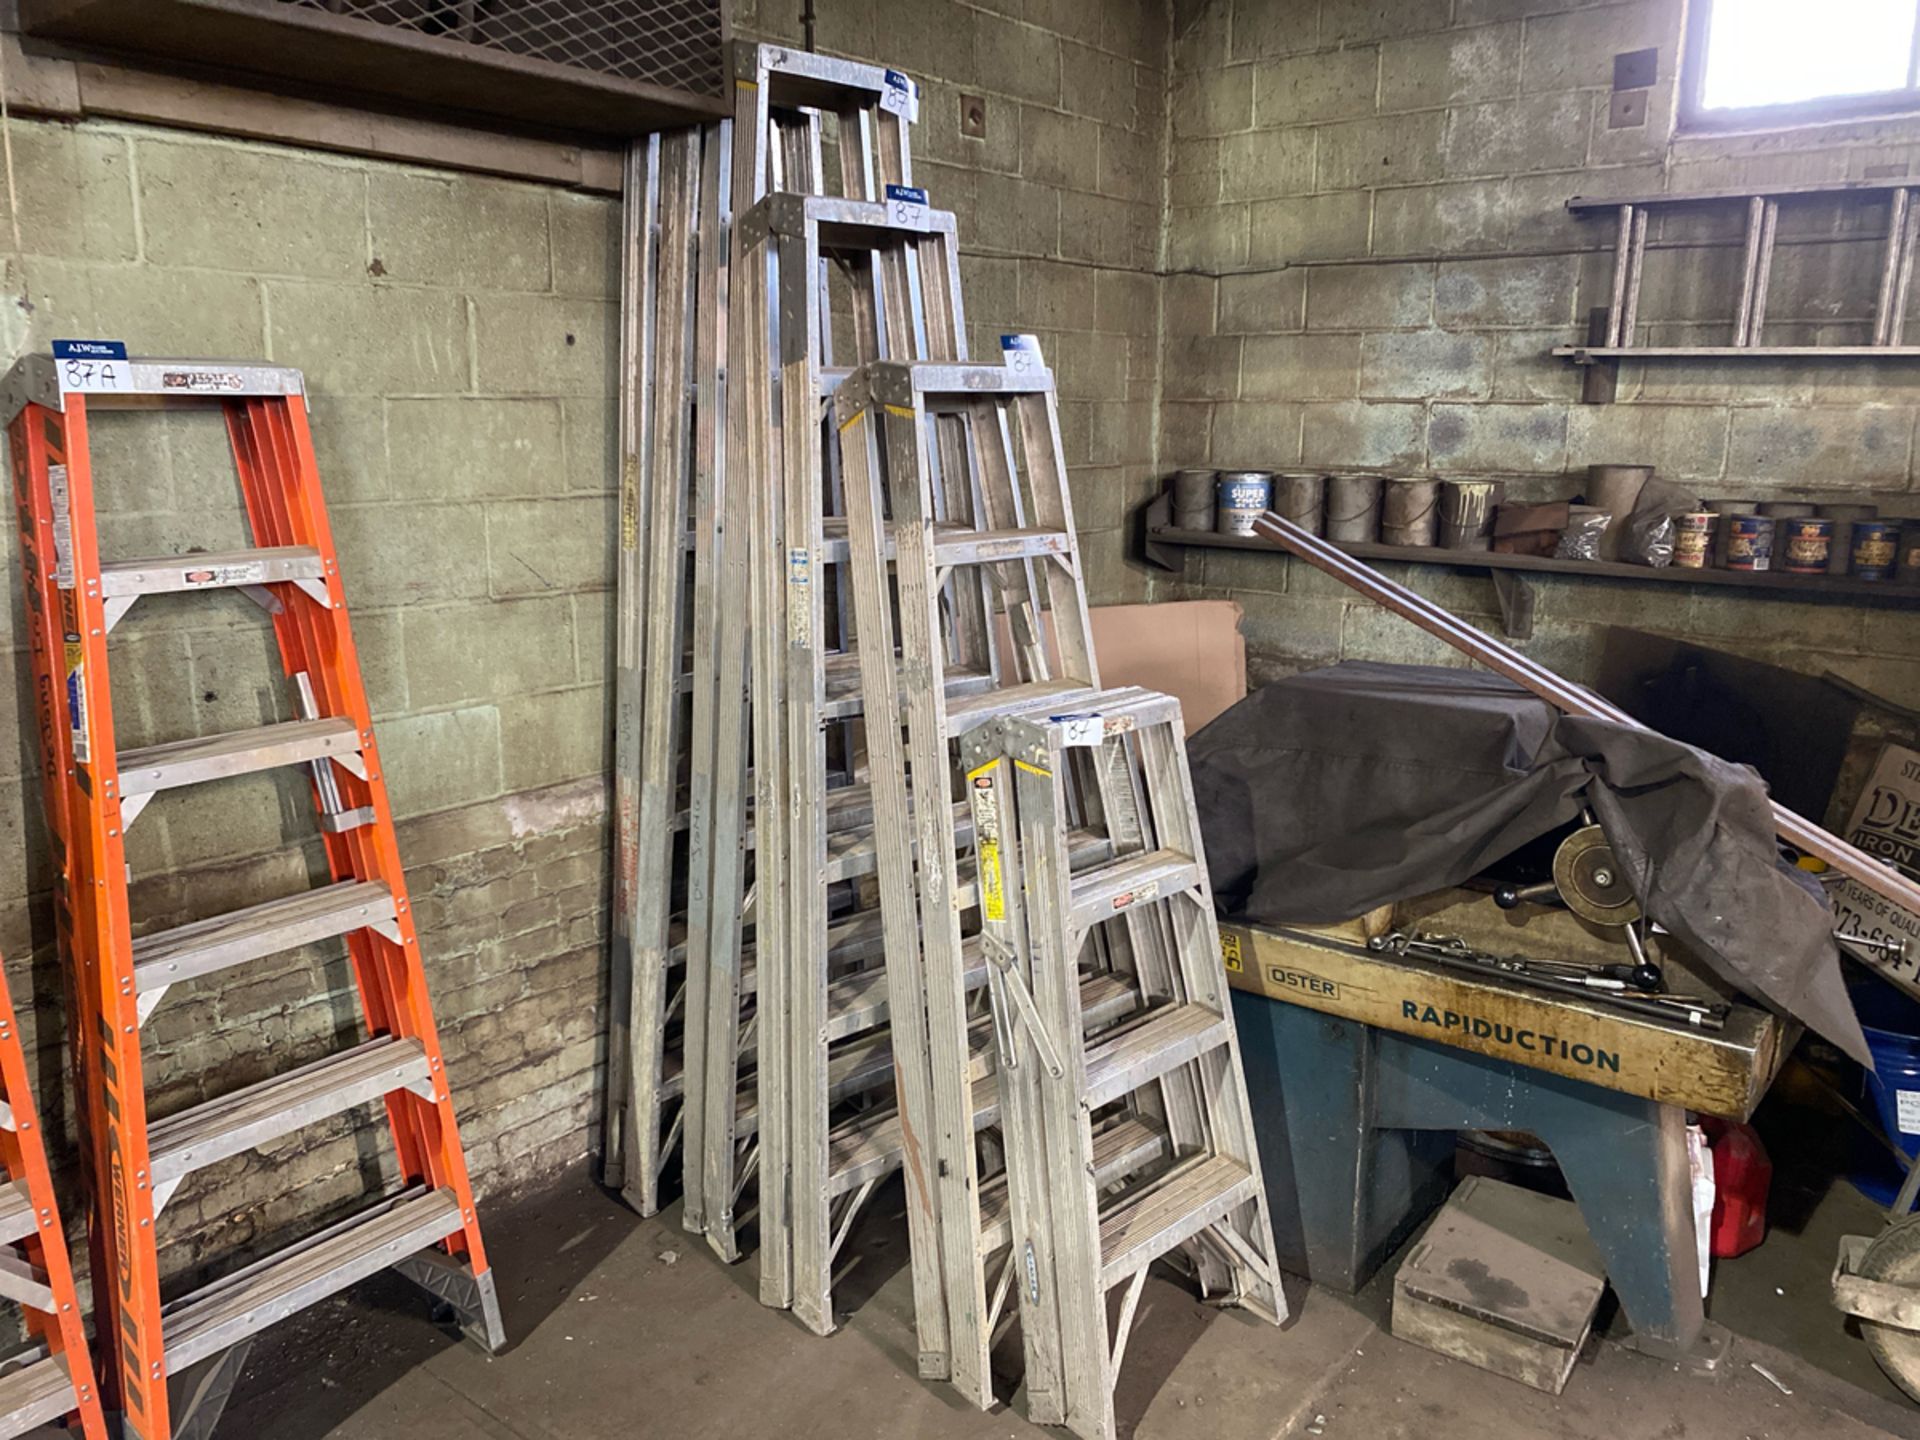 A Group of Aluminum Ladders